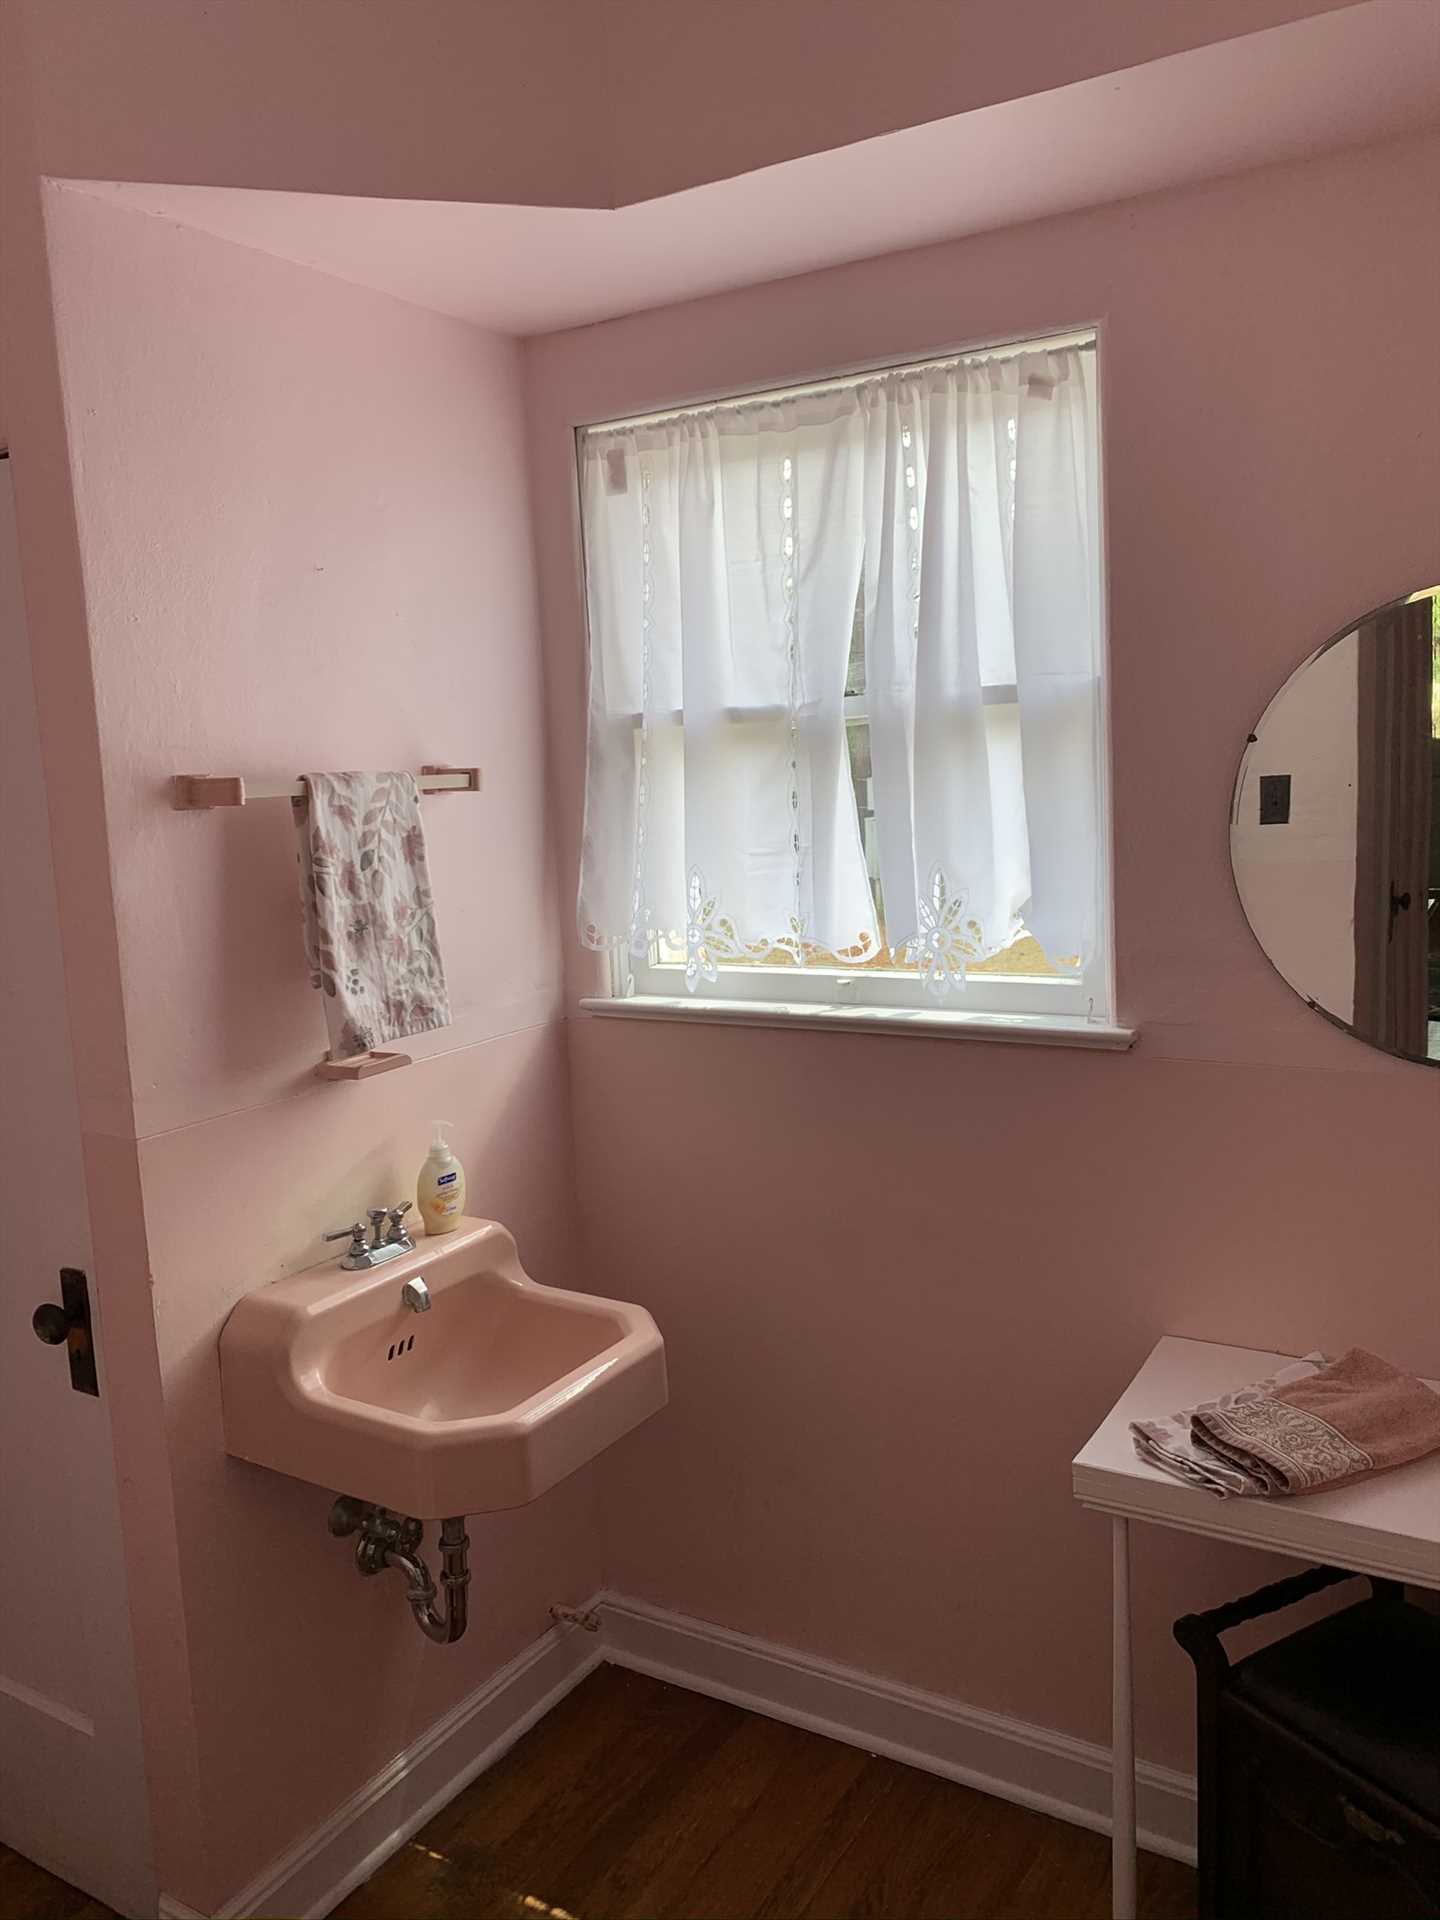                                                 The downstairs level of the River Home includes this clean and convenient half-bath. All the bathrooms and bedrooms here include complimentary linens.